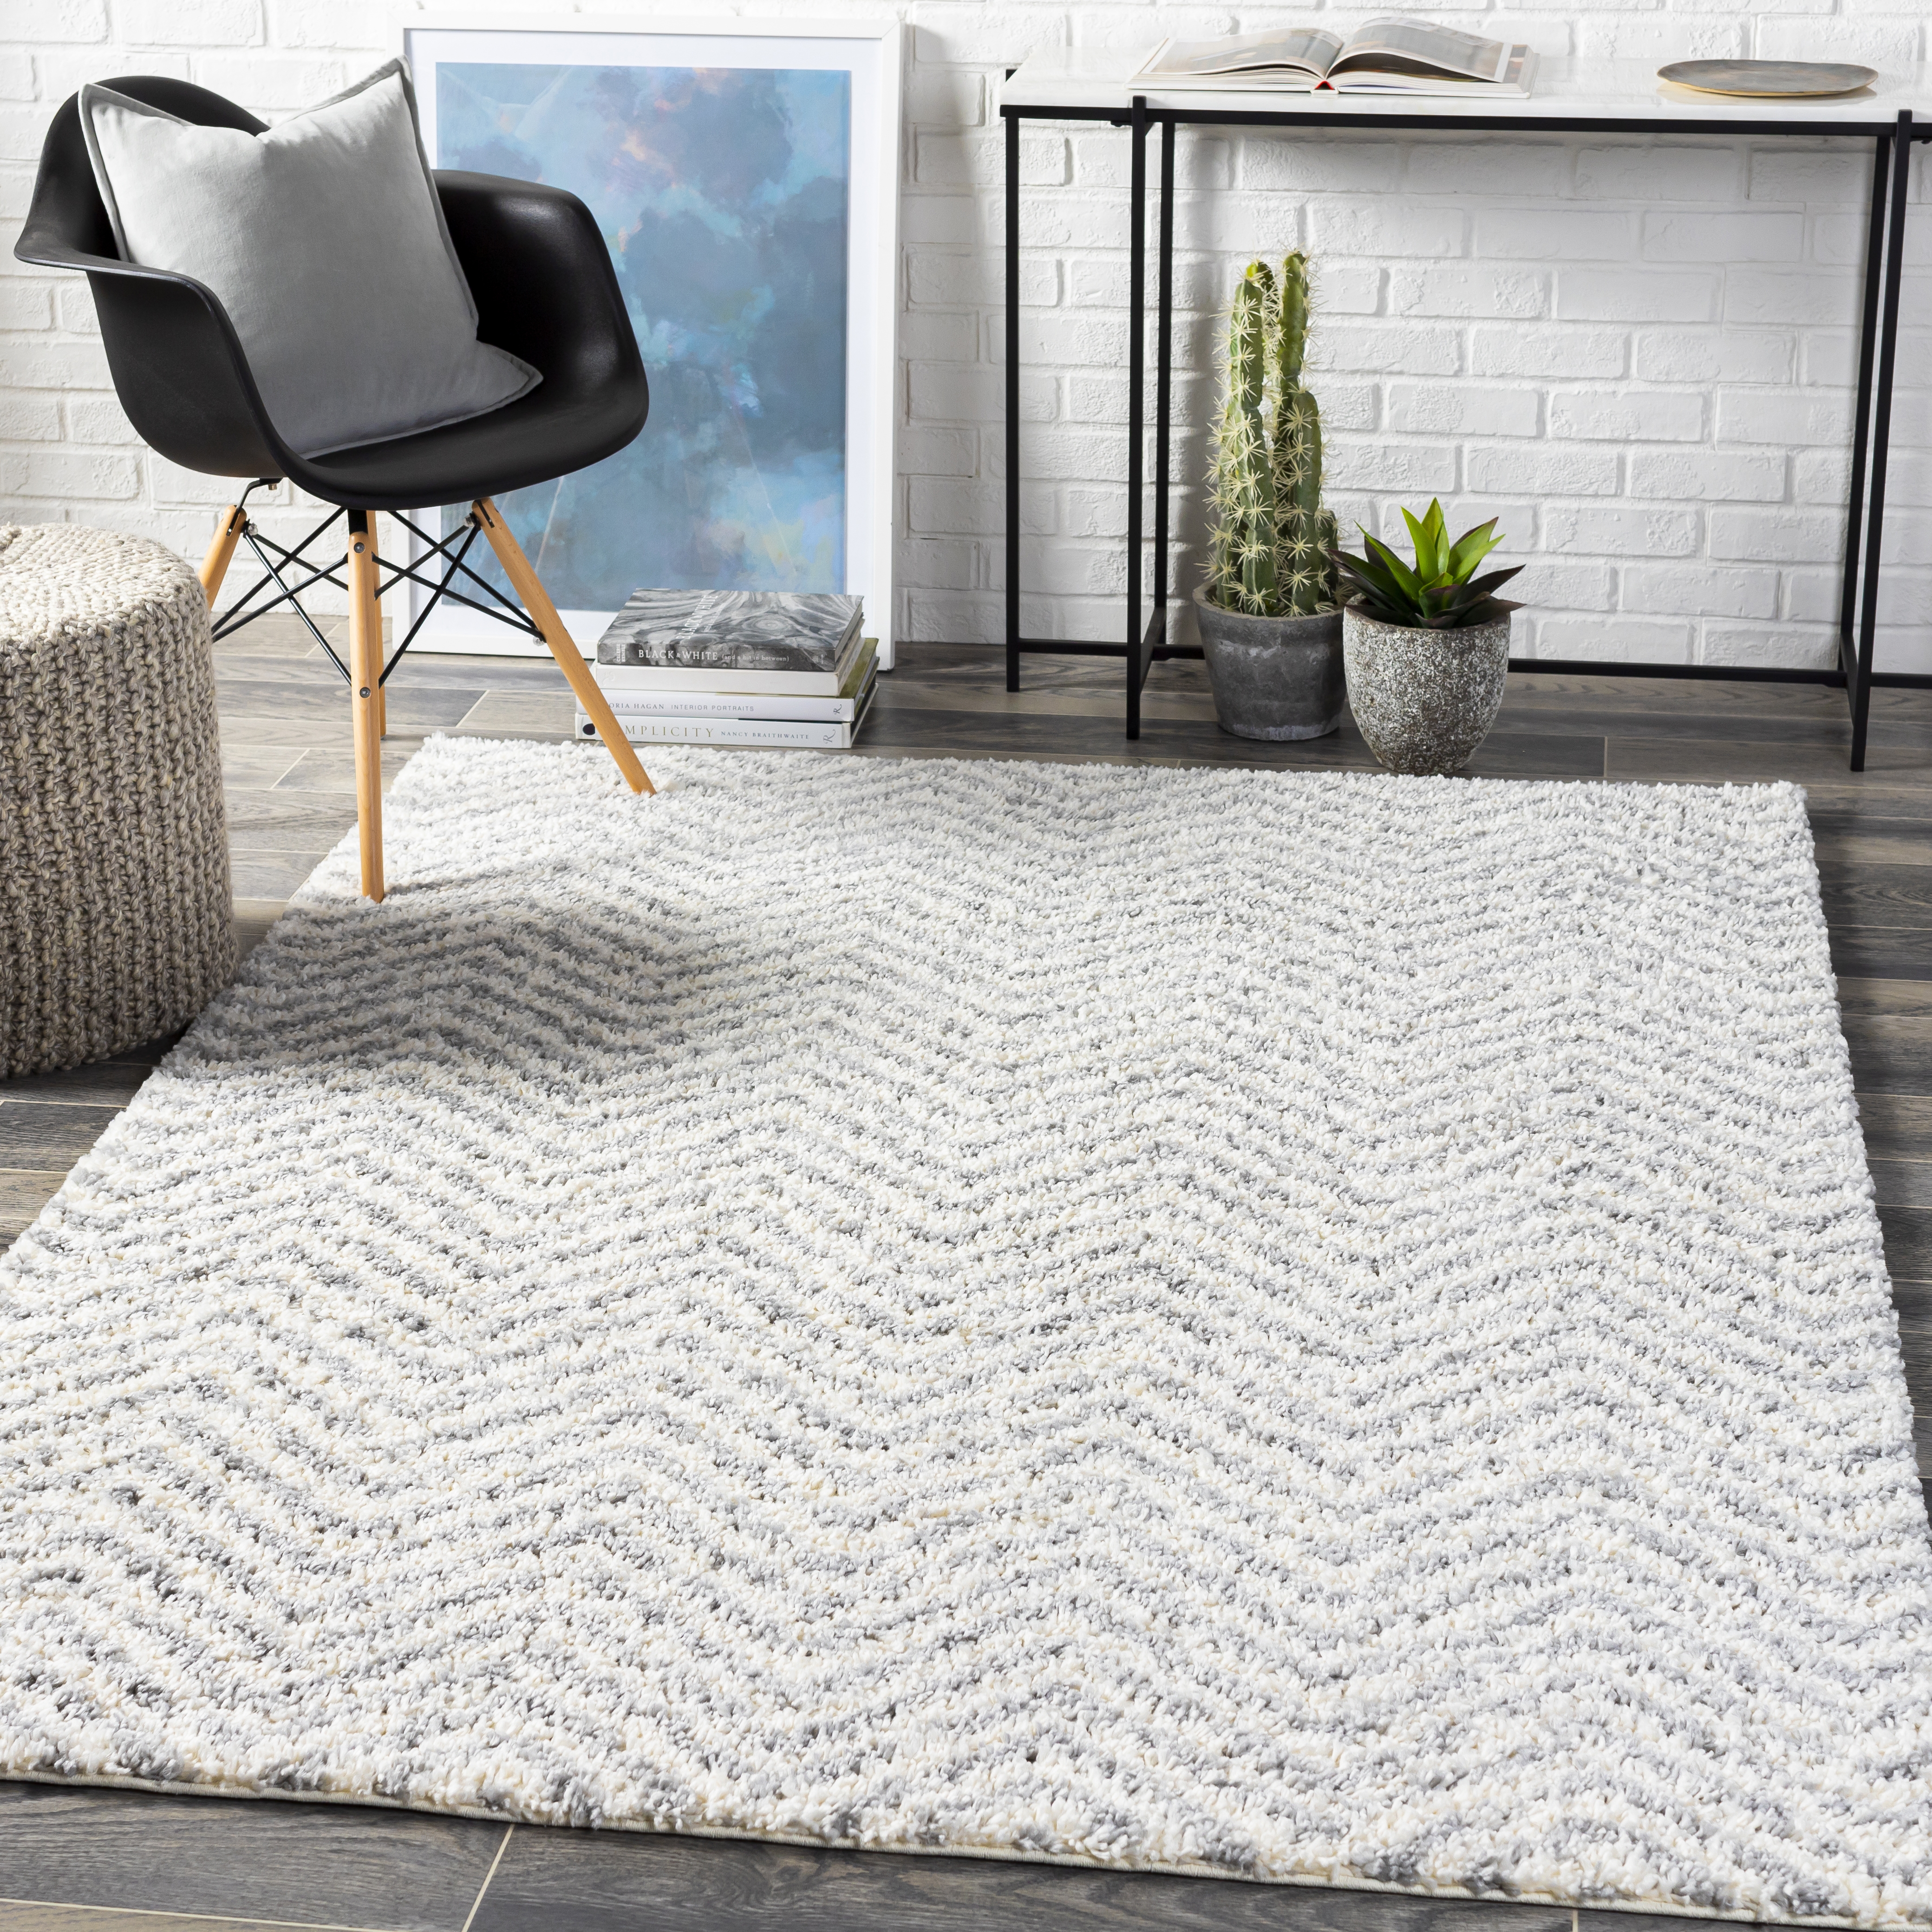 Deluxe Shag Rug, 2' x 3' - Image 1